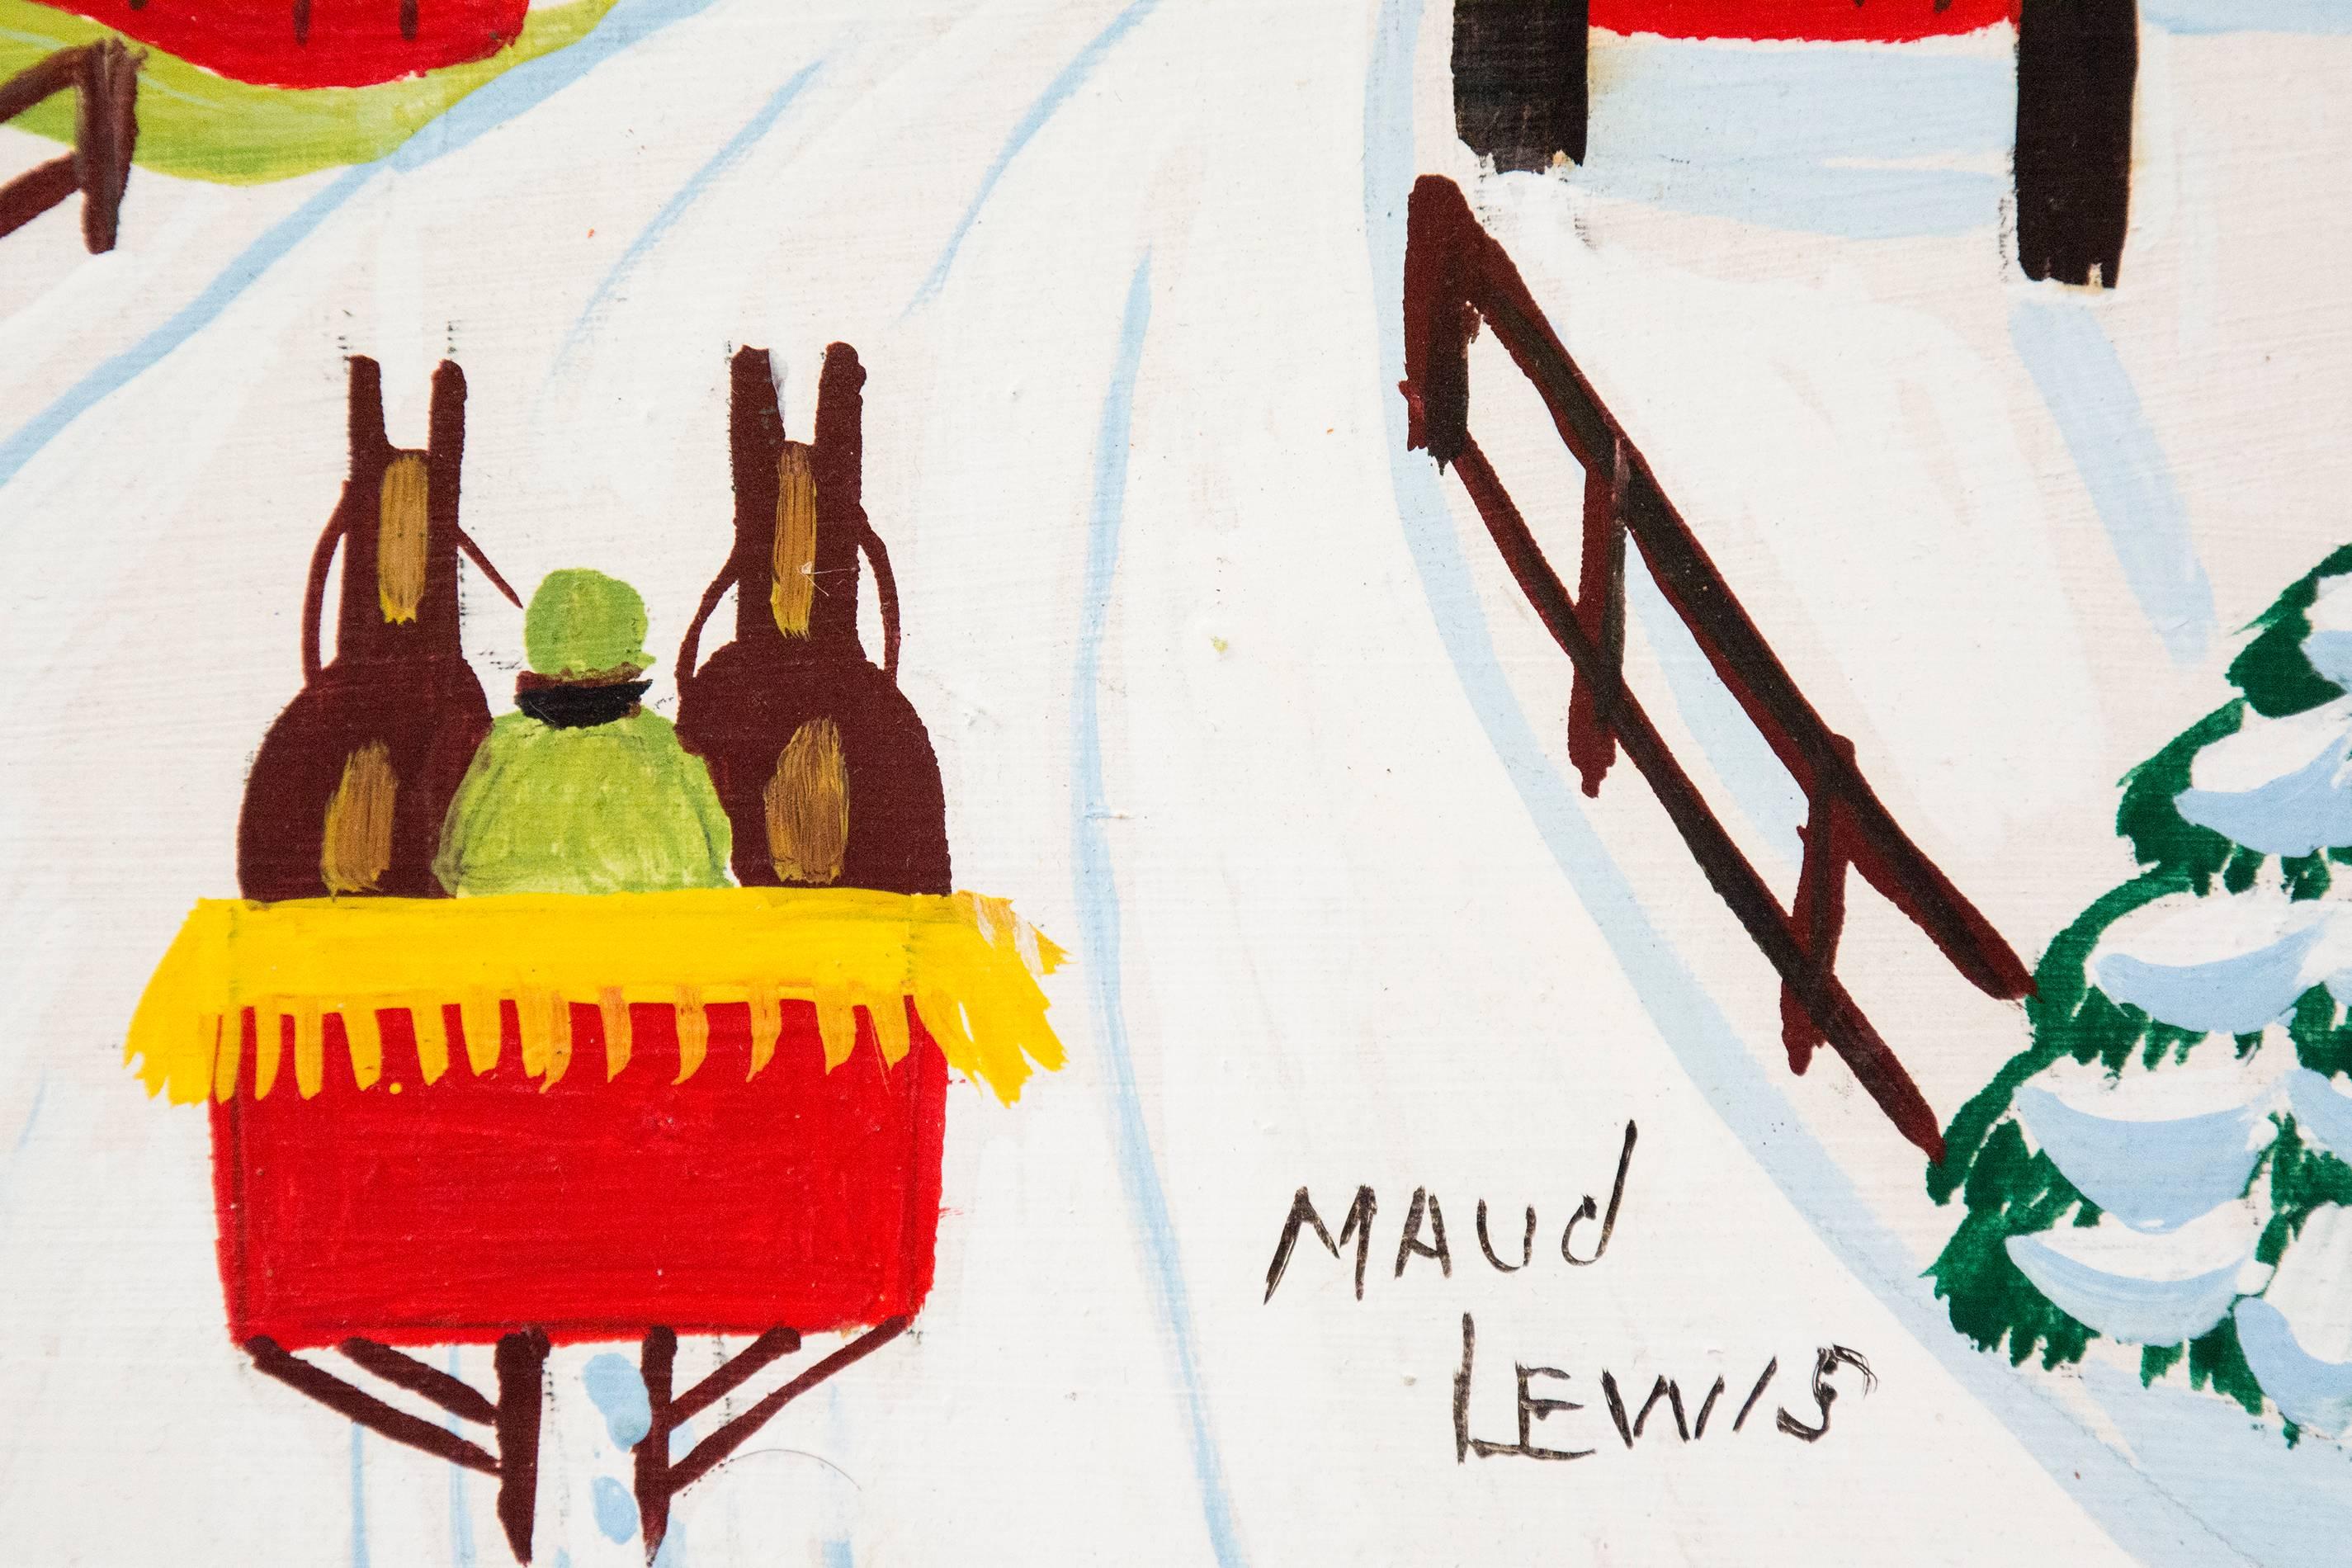 Sleigh Ride to Lake - Folk Art Painting by Maud Lewis